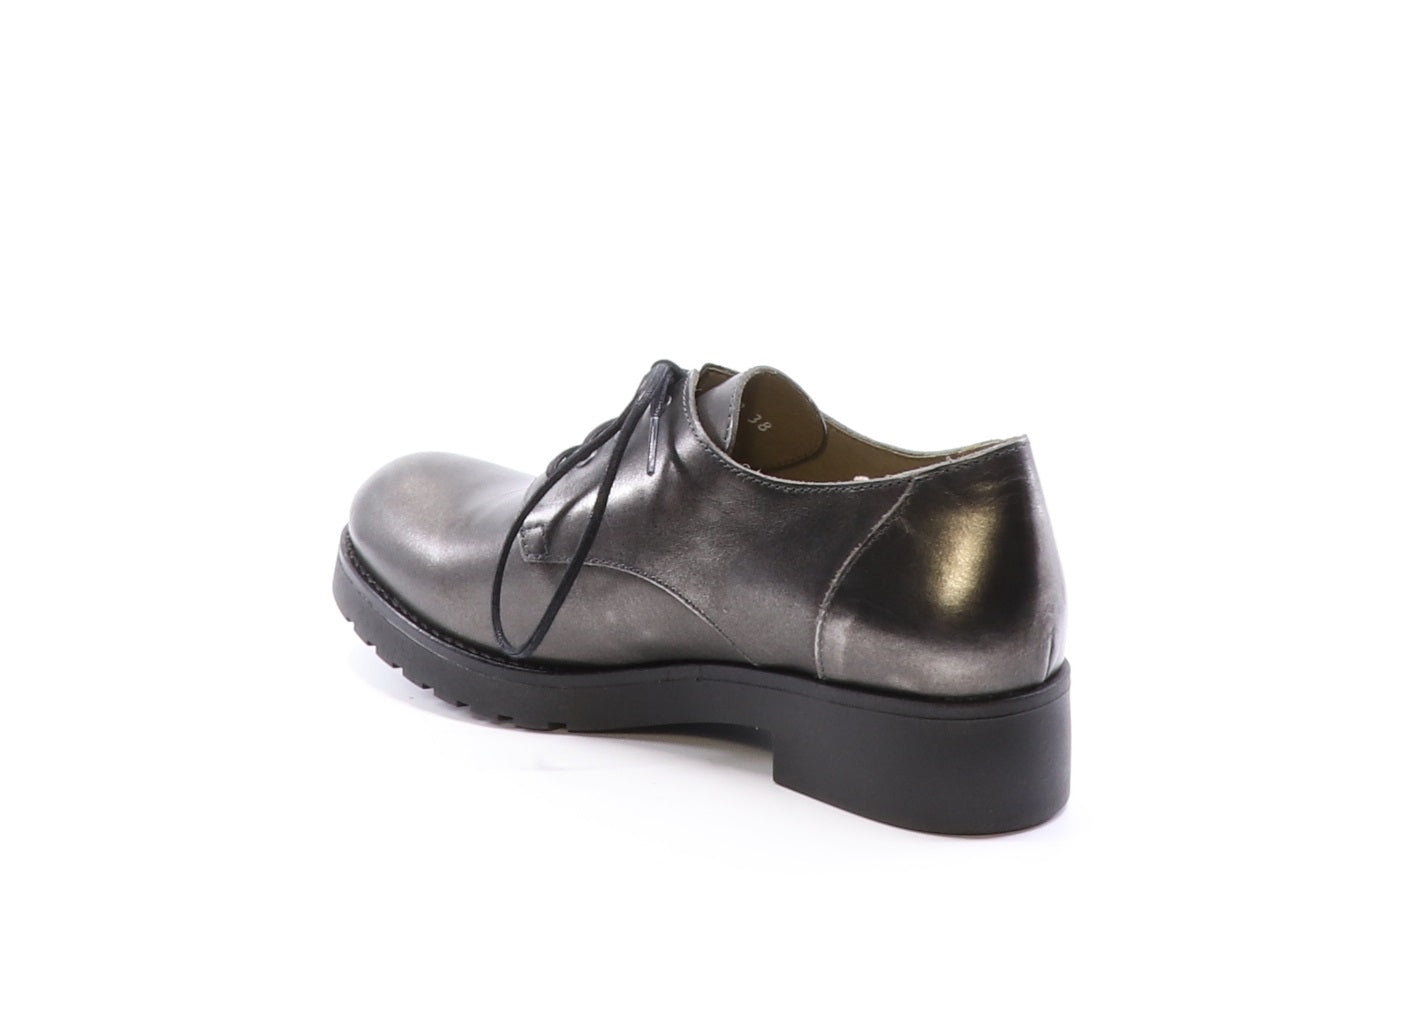 Fly London Beno in smoke colour available at Shoe Muse